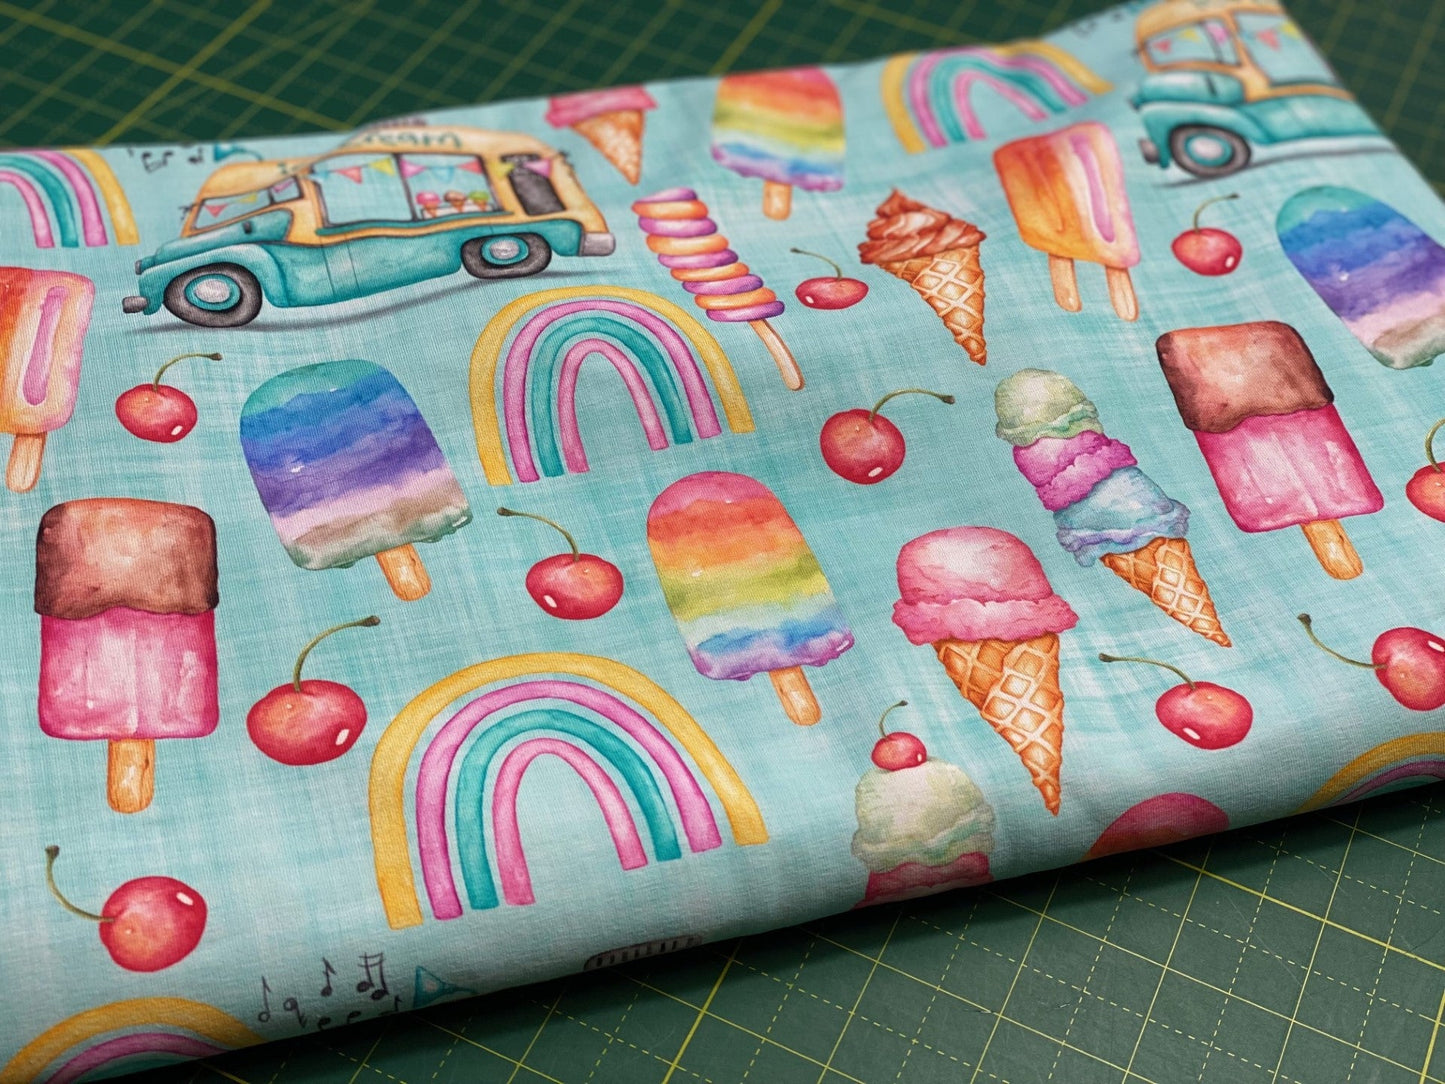 In Stock -Ice Cream Truck - Reactive-printed Jersey - by the 1/2 yd - Little Rhody Sewing Co.